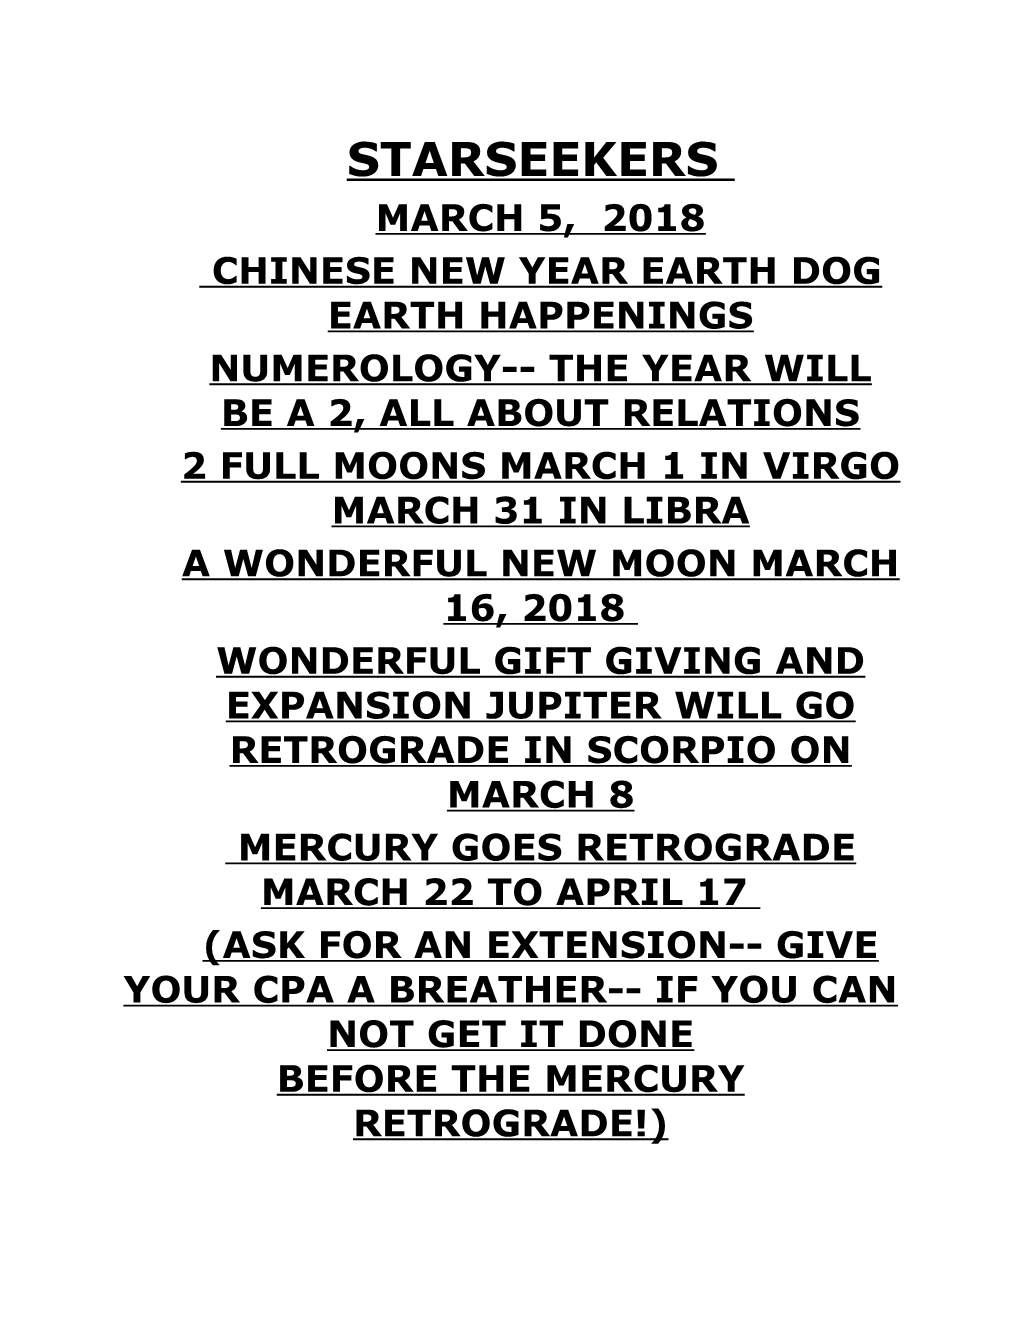 Chinese New Year Earth Dog Earth Happenings